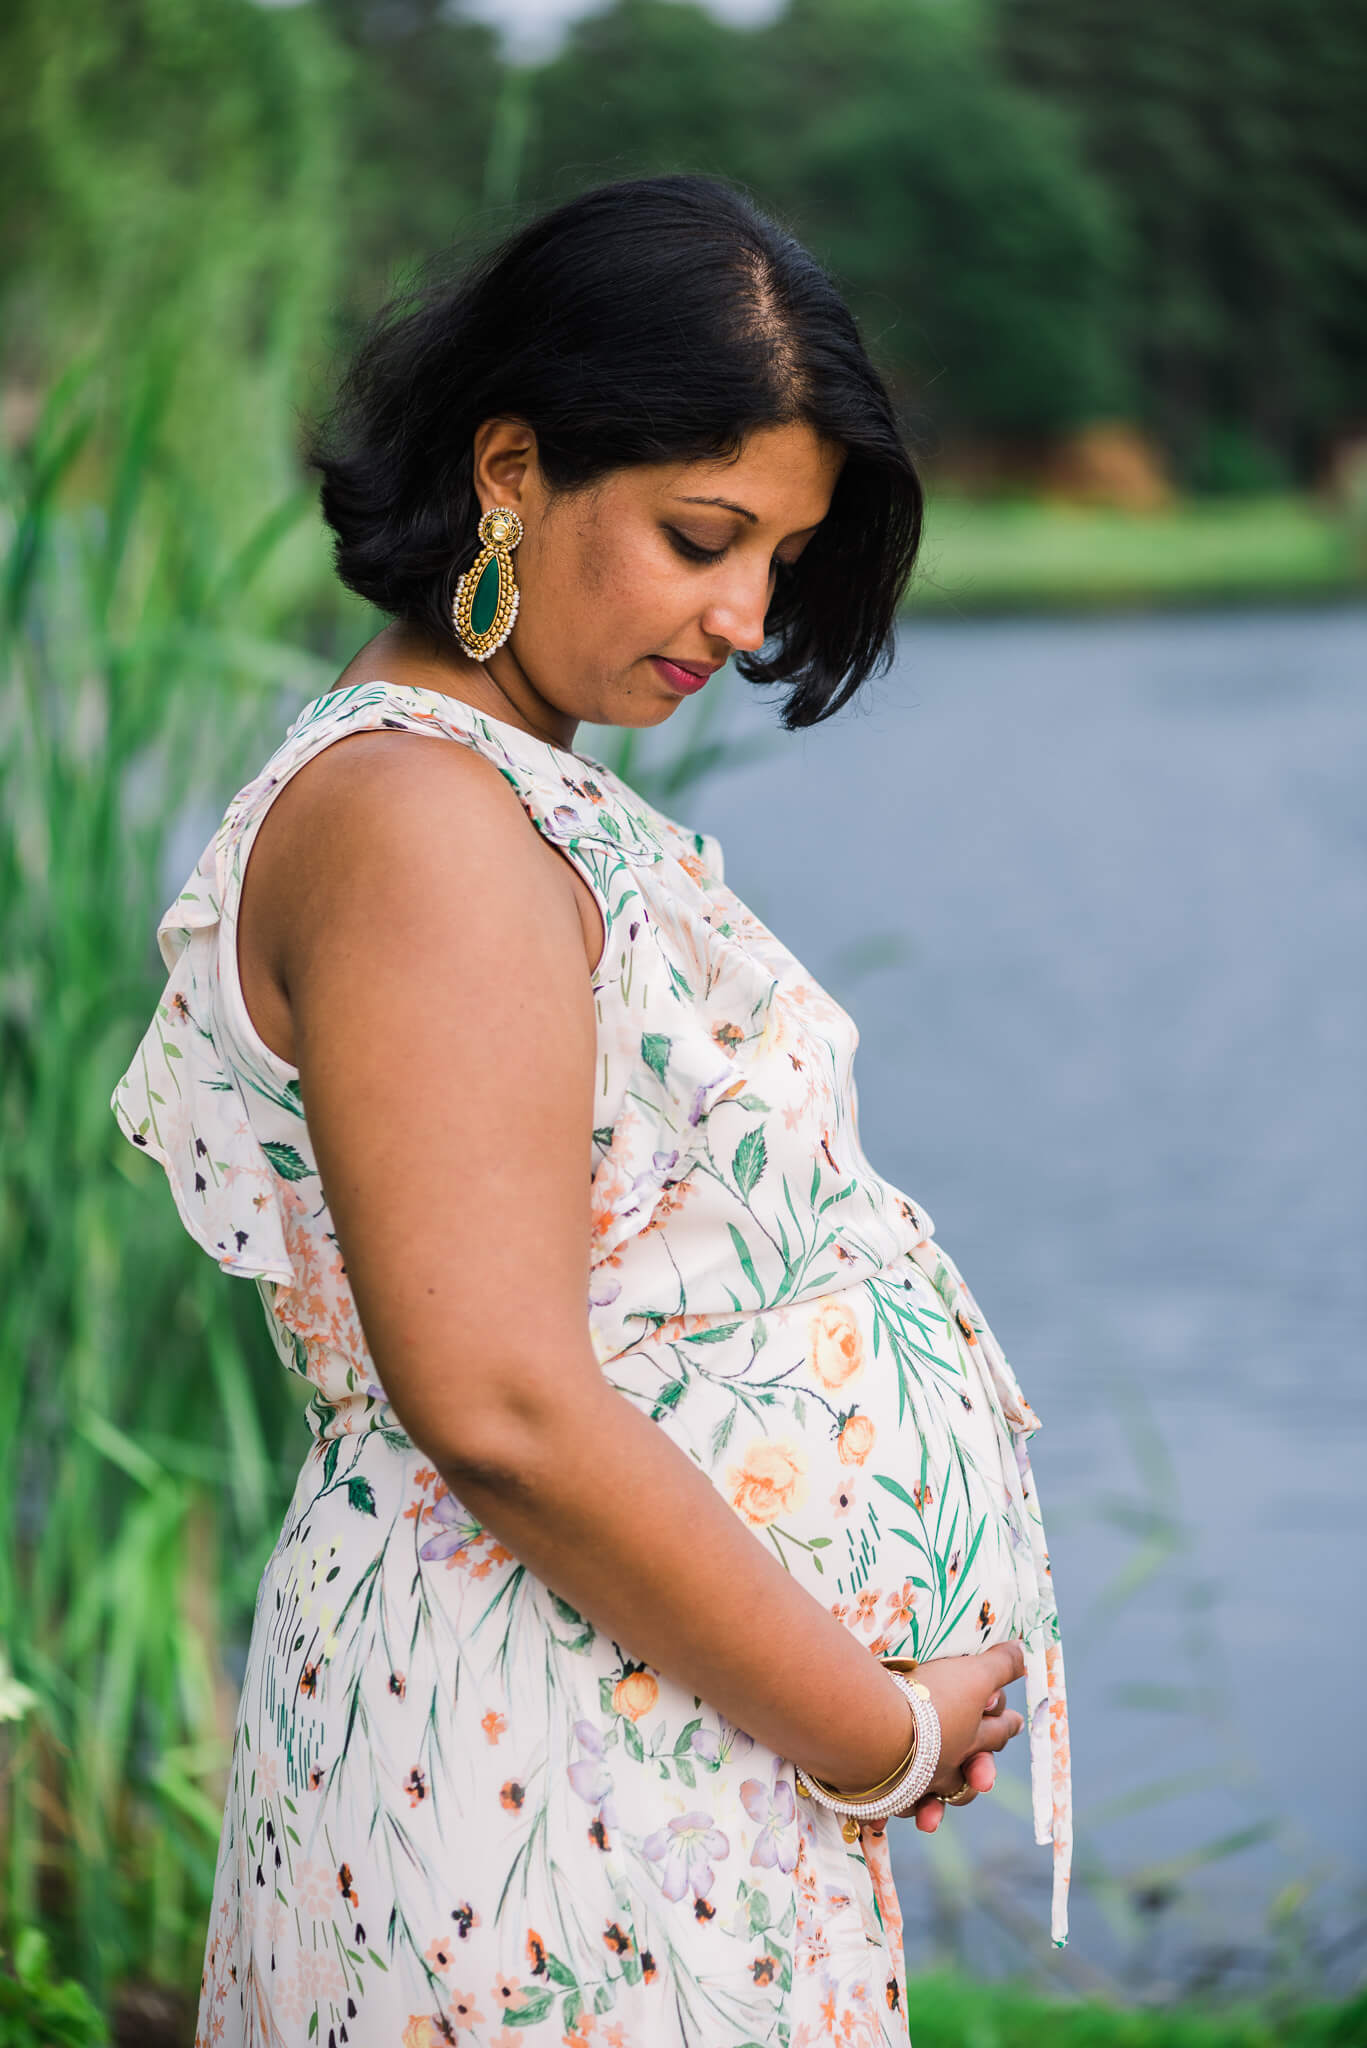 A mom to be gazes down at her bump taken care of by center for midwifery while standing on the edge of a lake